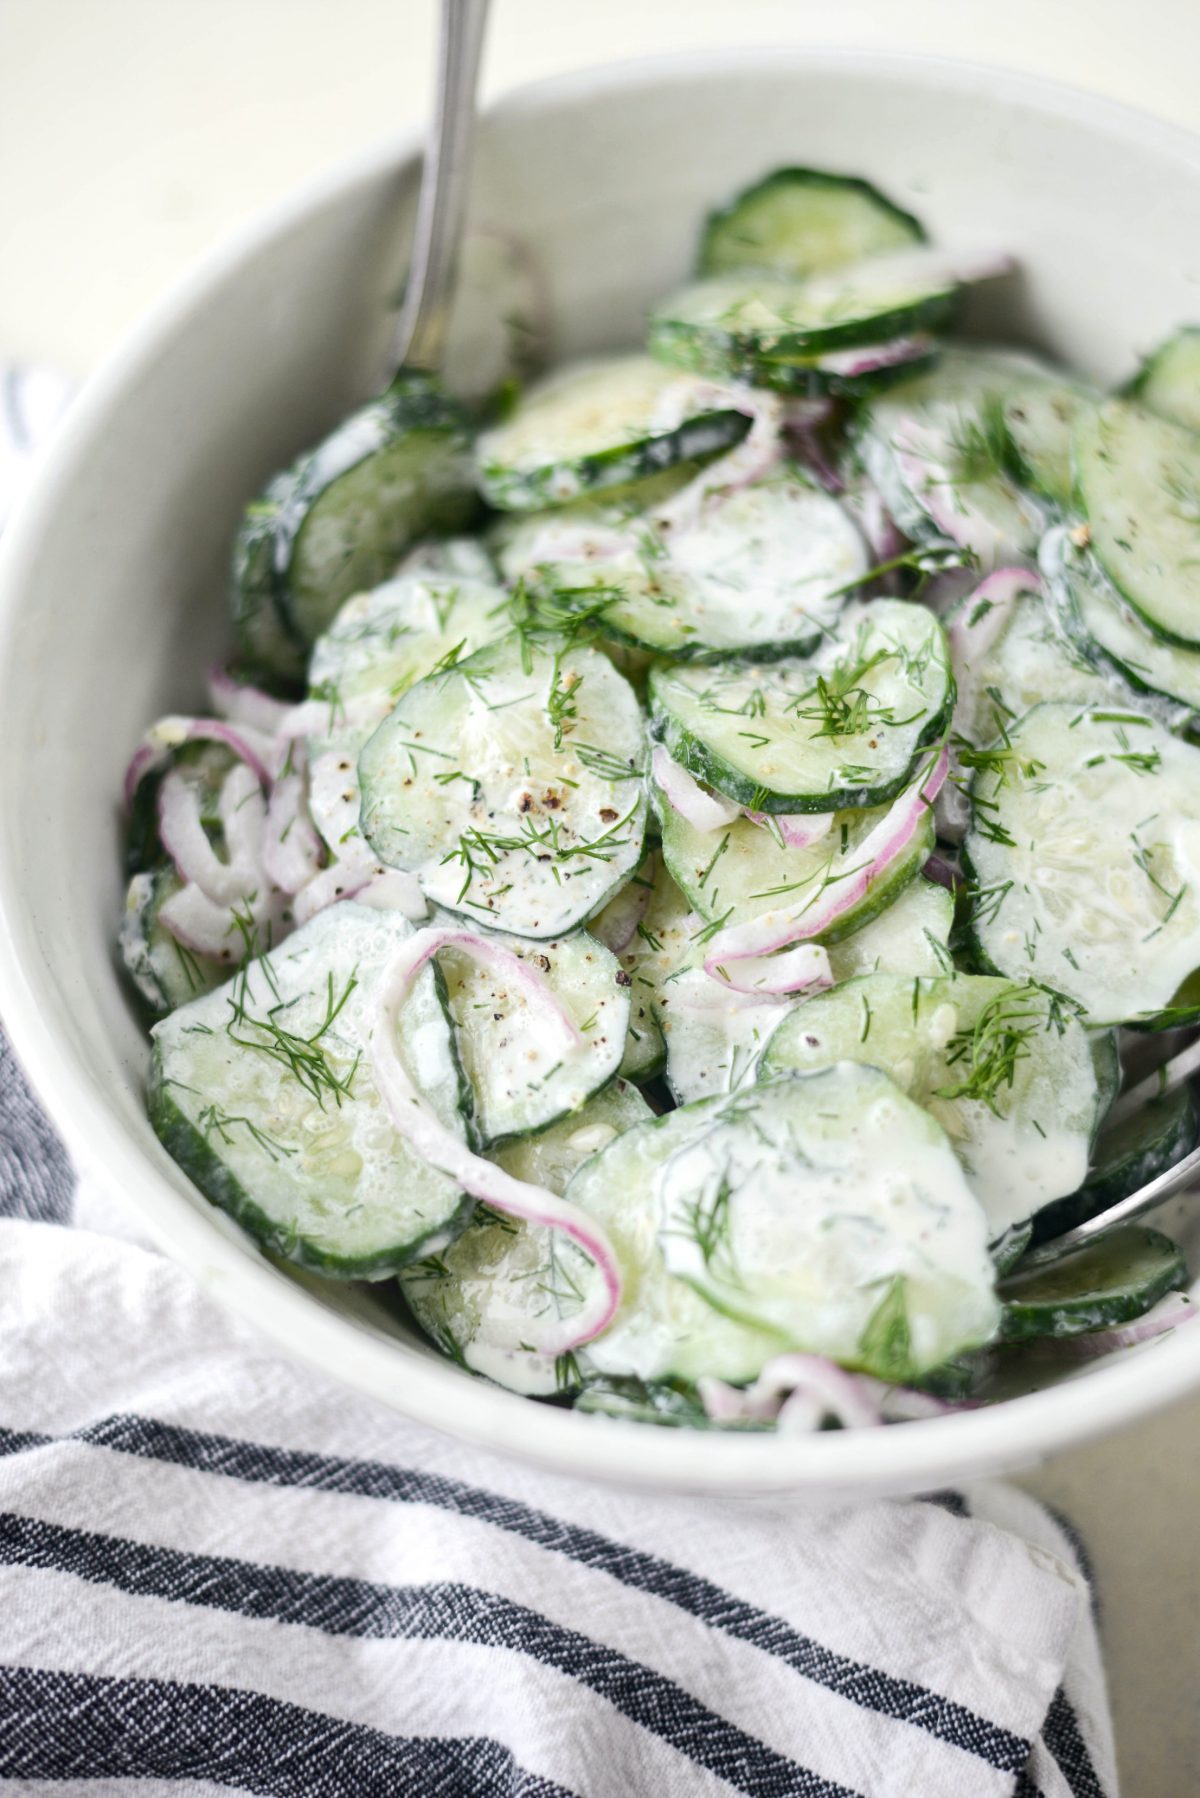 Cucumber Salad with Sour Cream Dill Dressing l SimplyScratch.com